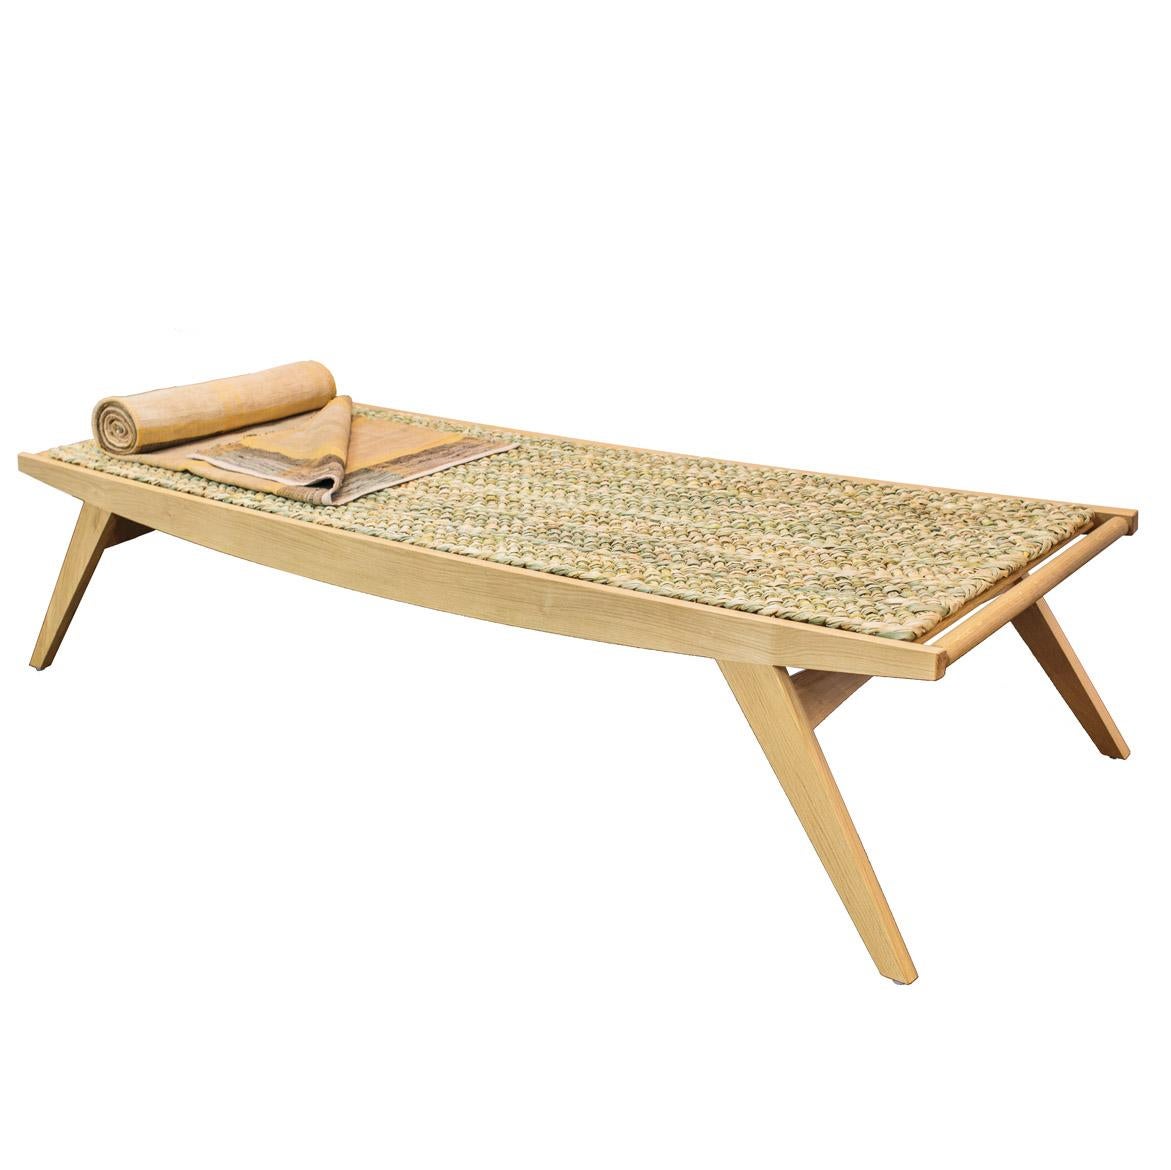 Our Lambda daybed is handmade in small batches from sustainably sourced oak. Both modern and traditional joinery techniques are employed, ensuring the best attention to detail and quality. The mat is woven from English rushes.

Our iconic pi stool